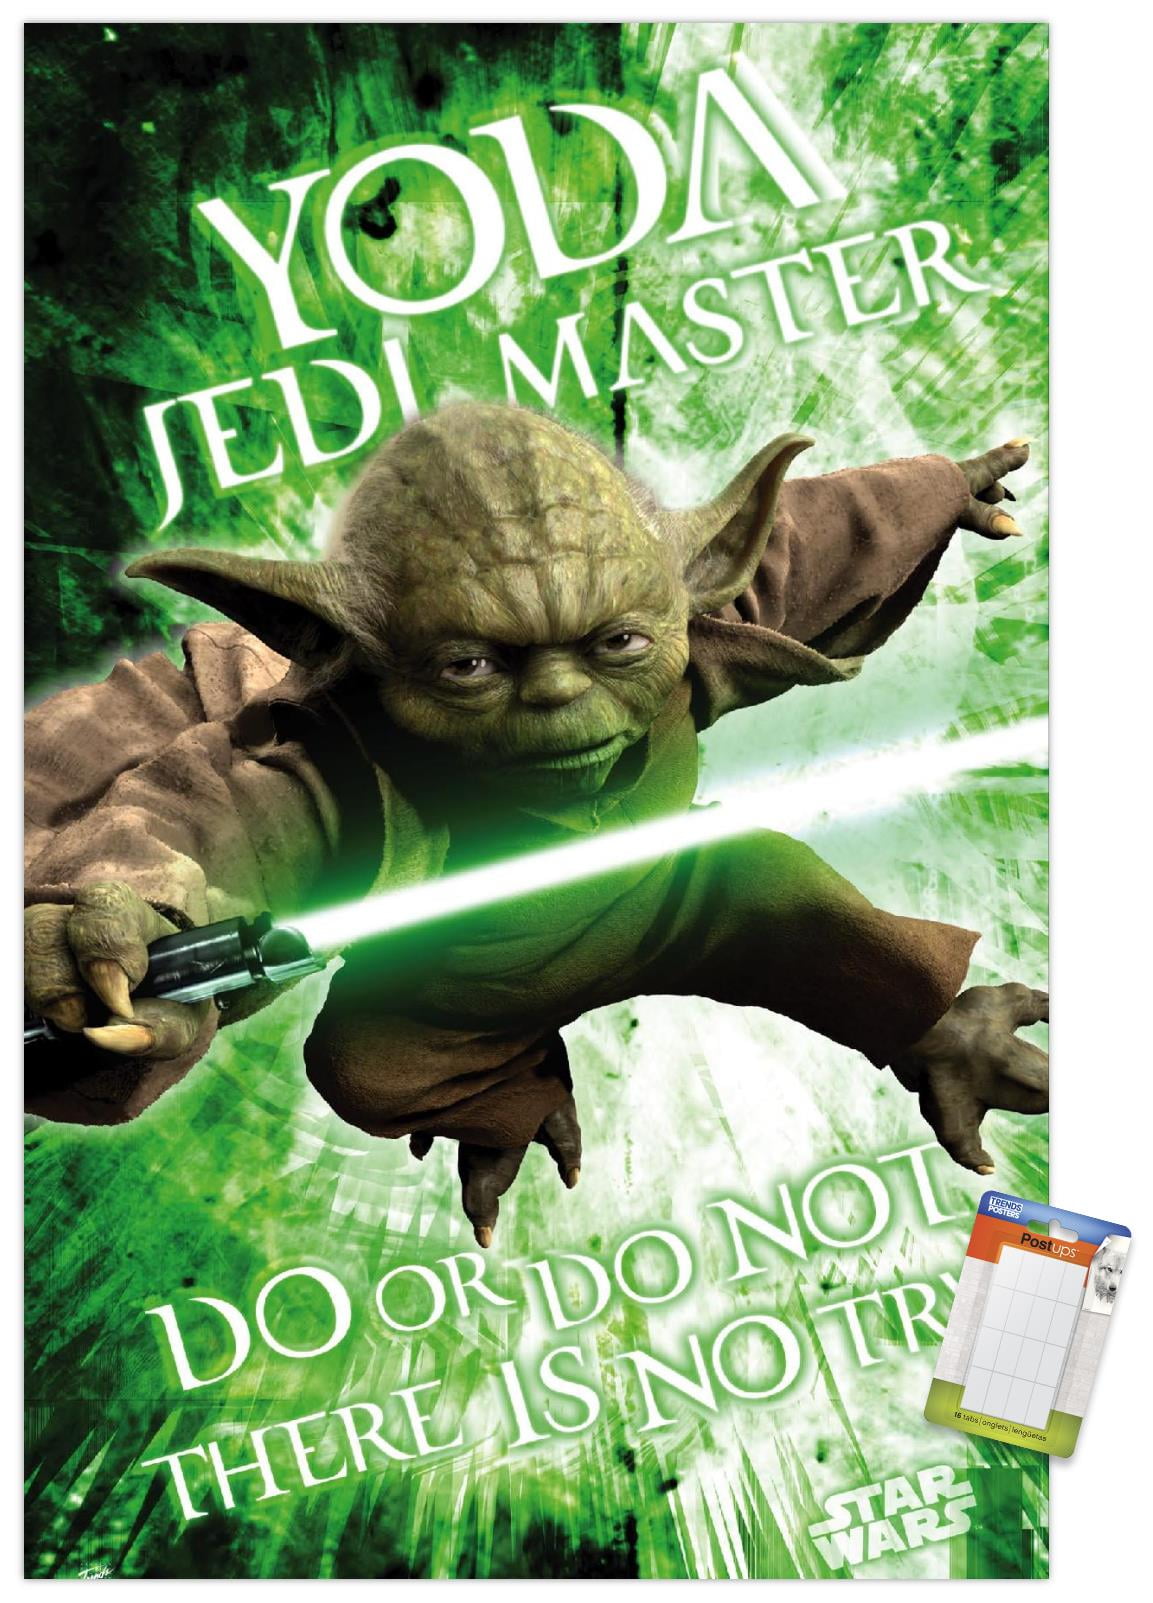 YODA DO or do NOT there is no TRY STAR WARS Glossy Magnet 